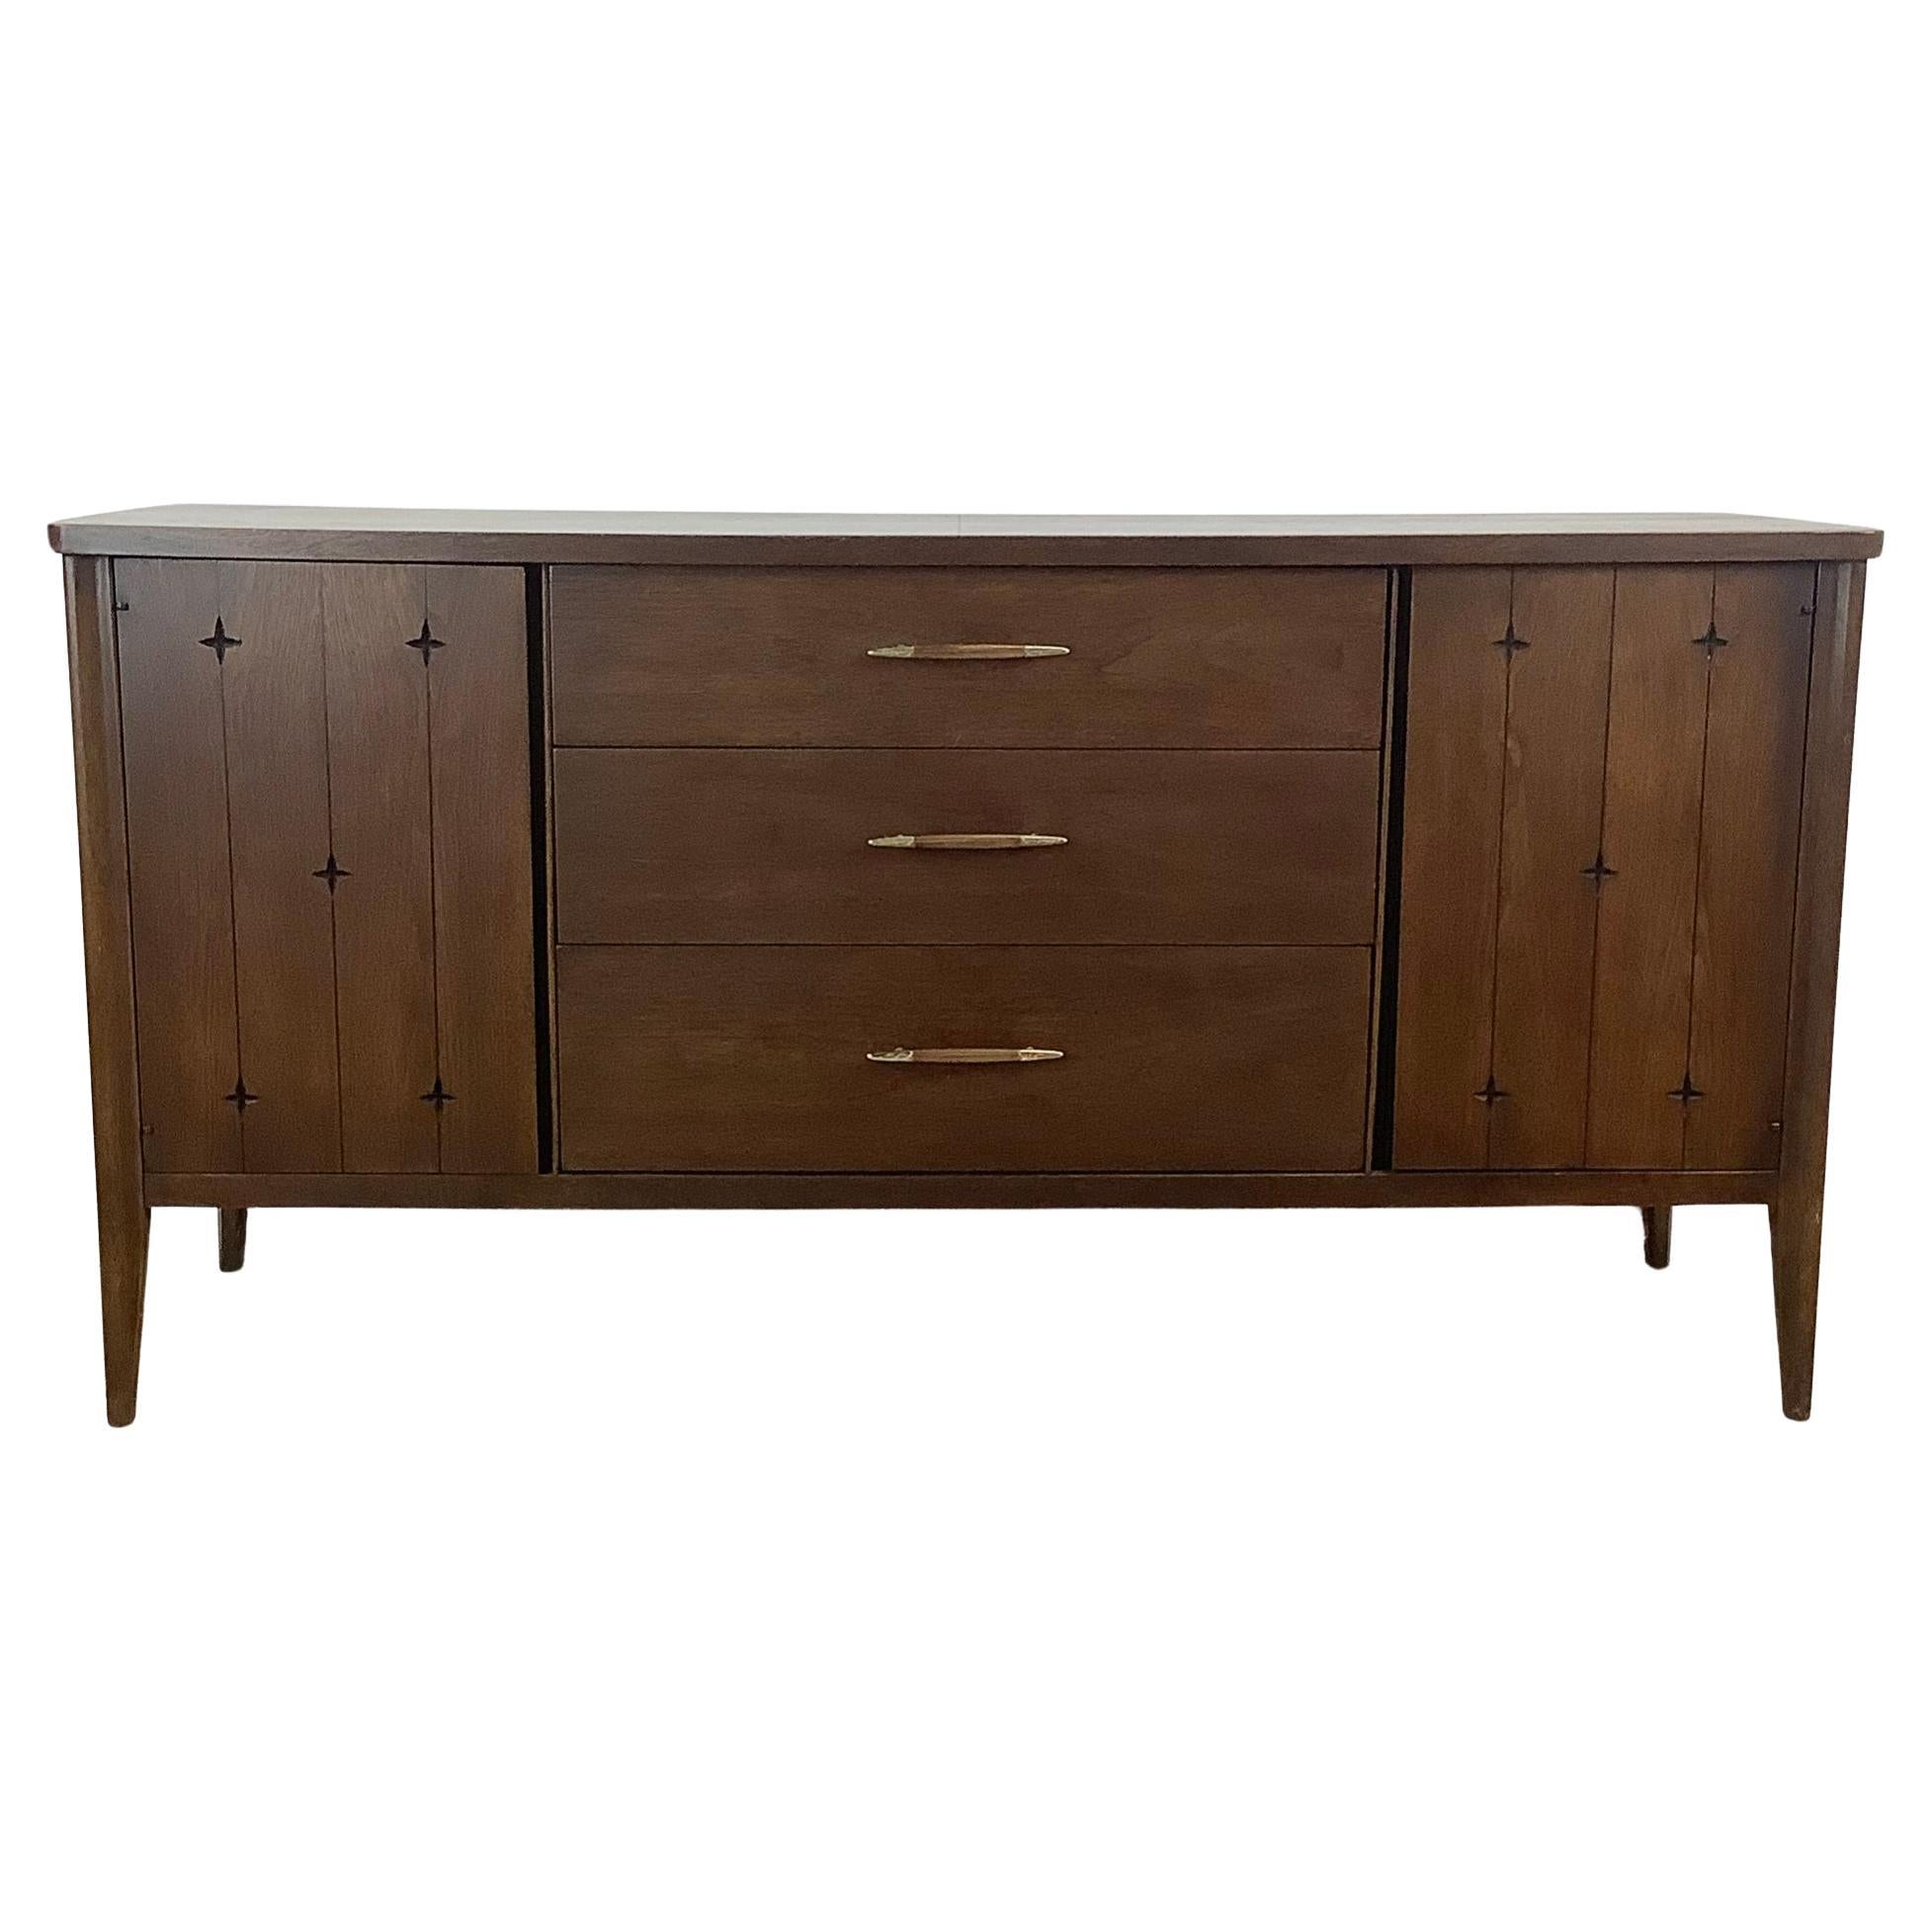 Mid-Century Modern Premier Sideboard by Broyhill For Sale